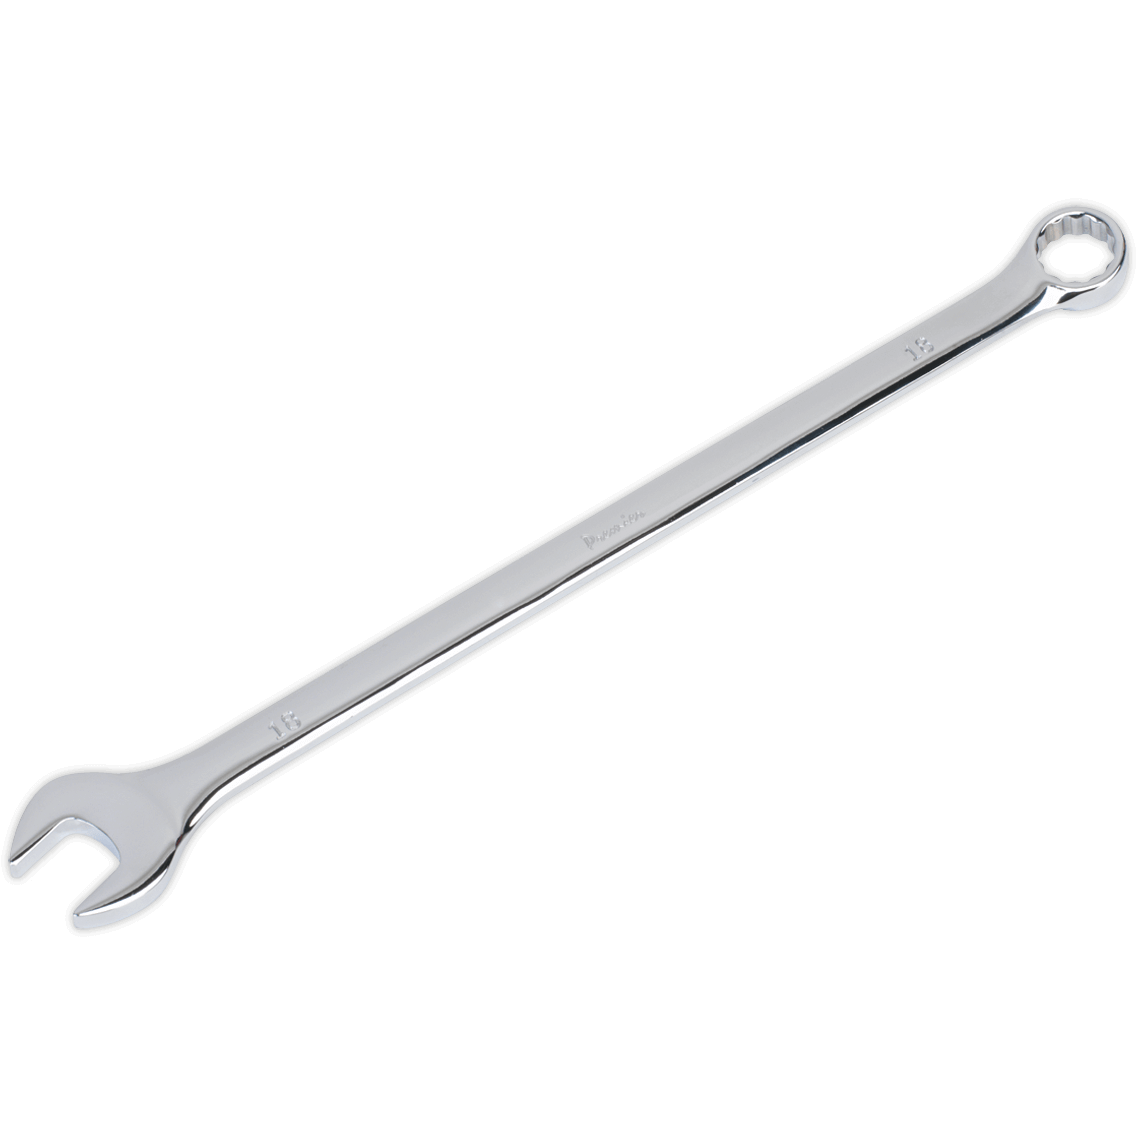 Photos - Wrench Sealey Extra Long Combination Spanner Metric 18mm AK631018 